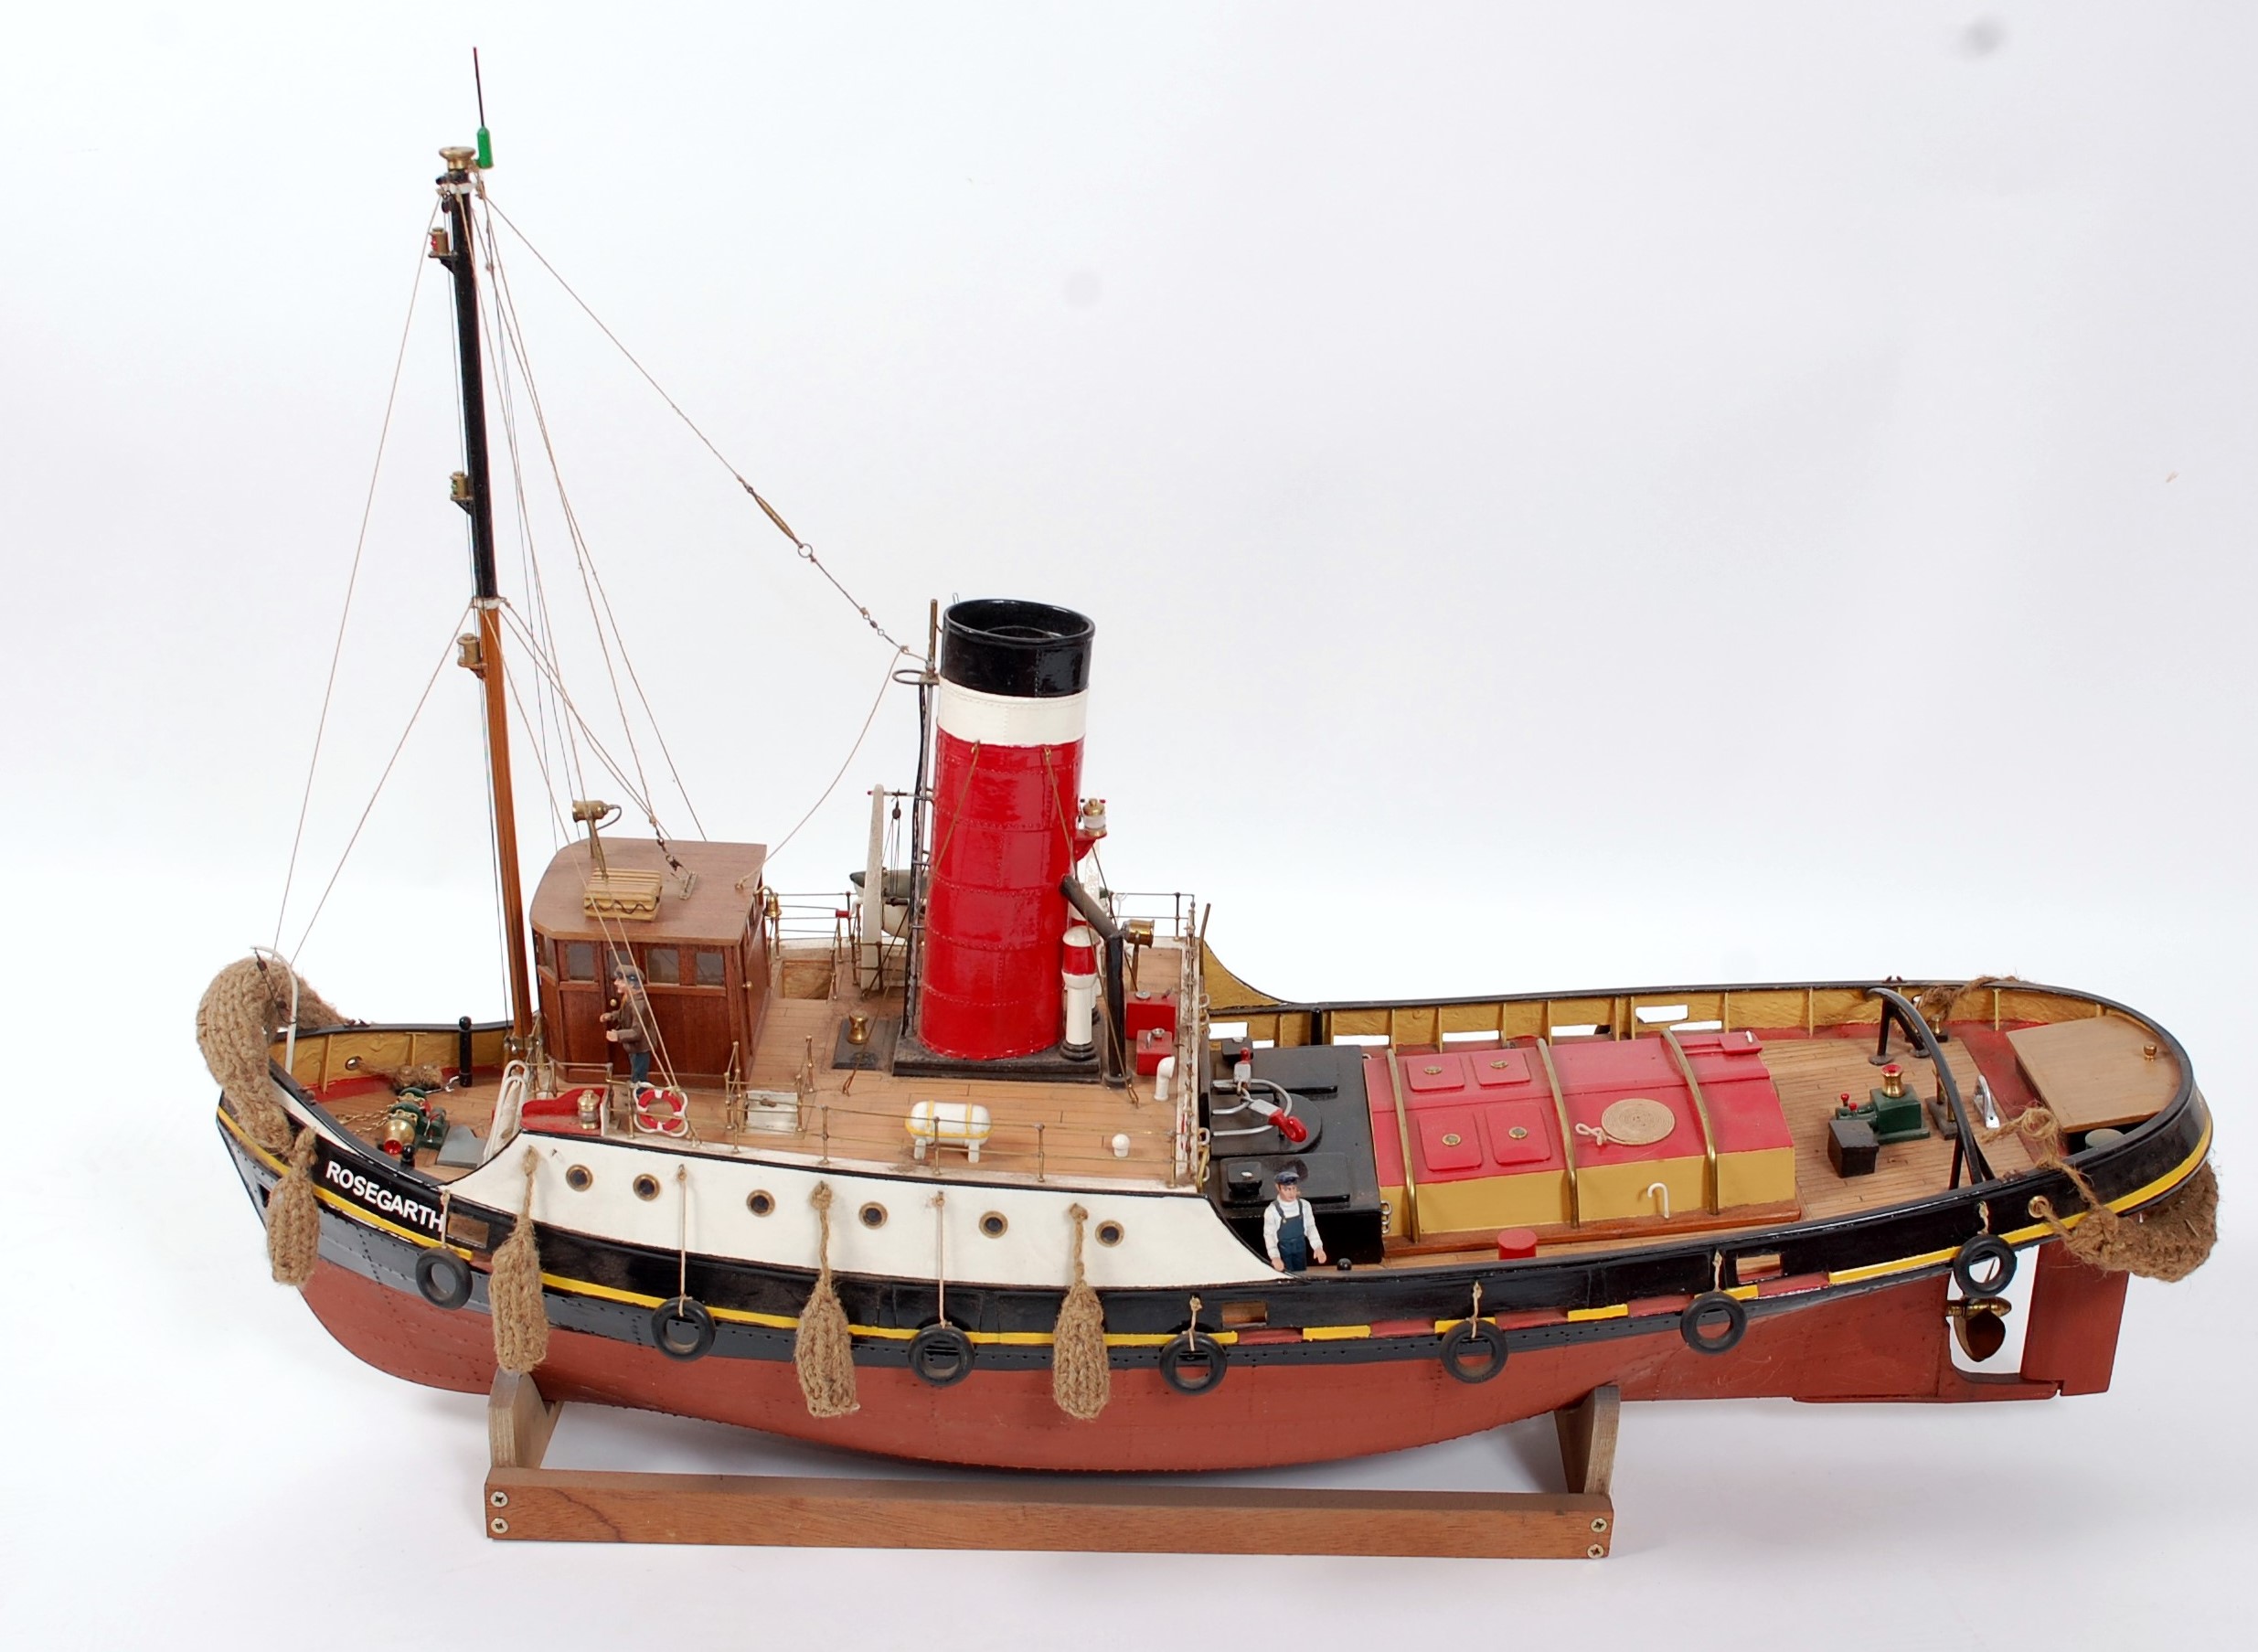 A GRP hulled and wooden kit built model of a remote control steam cruiser tug boat named